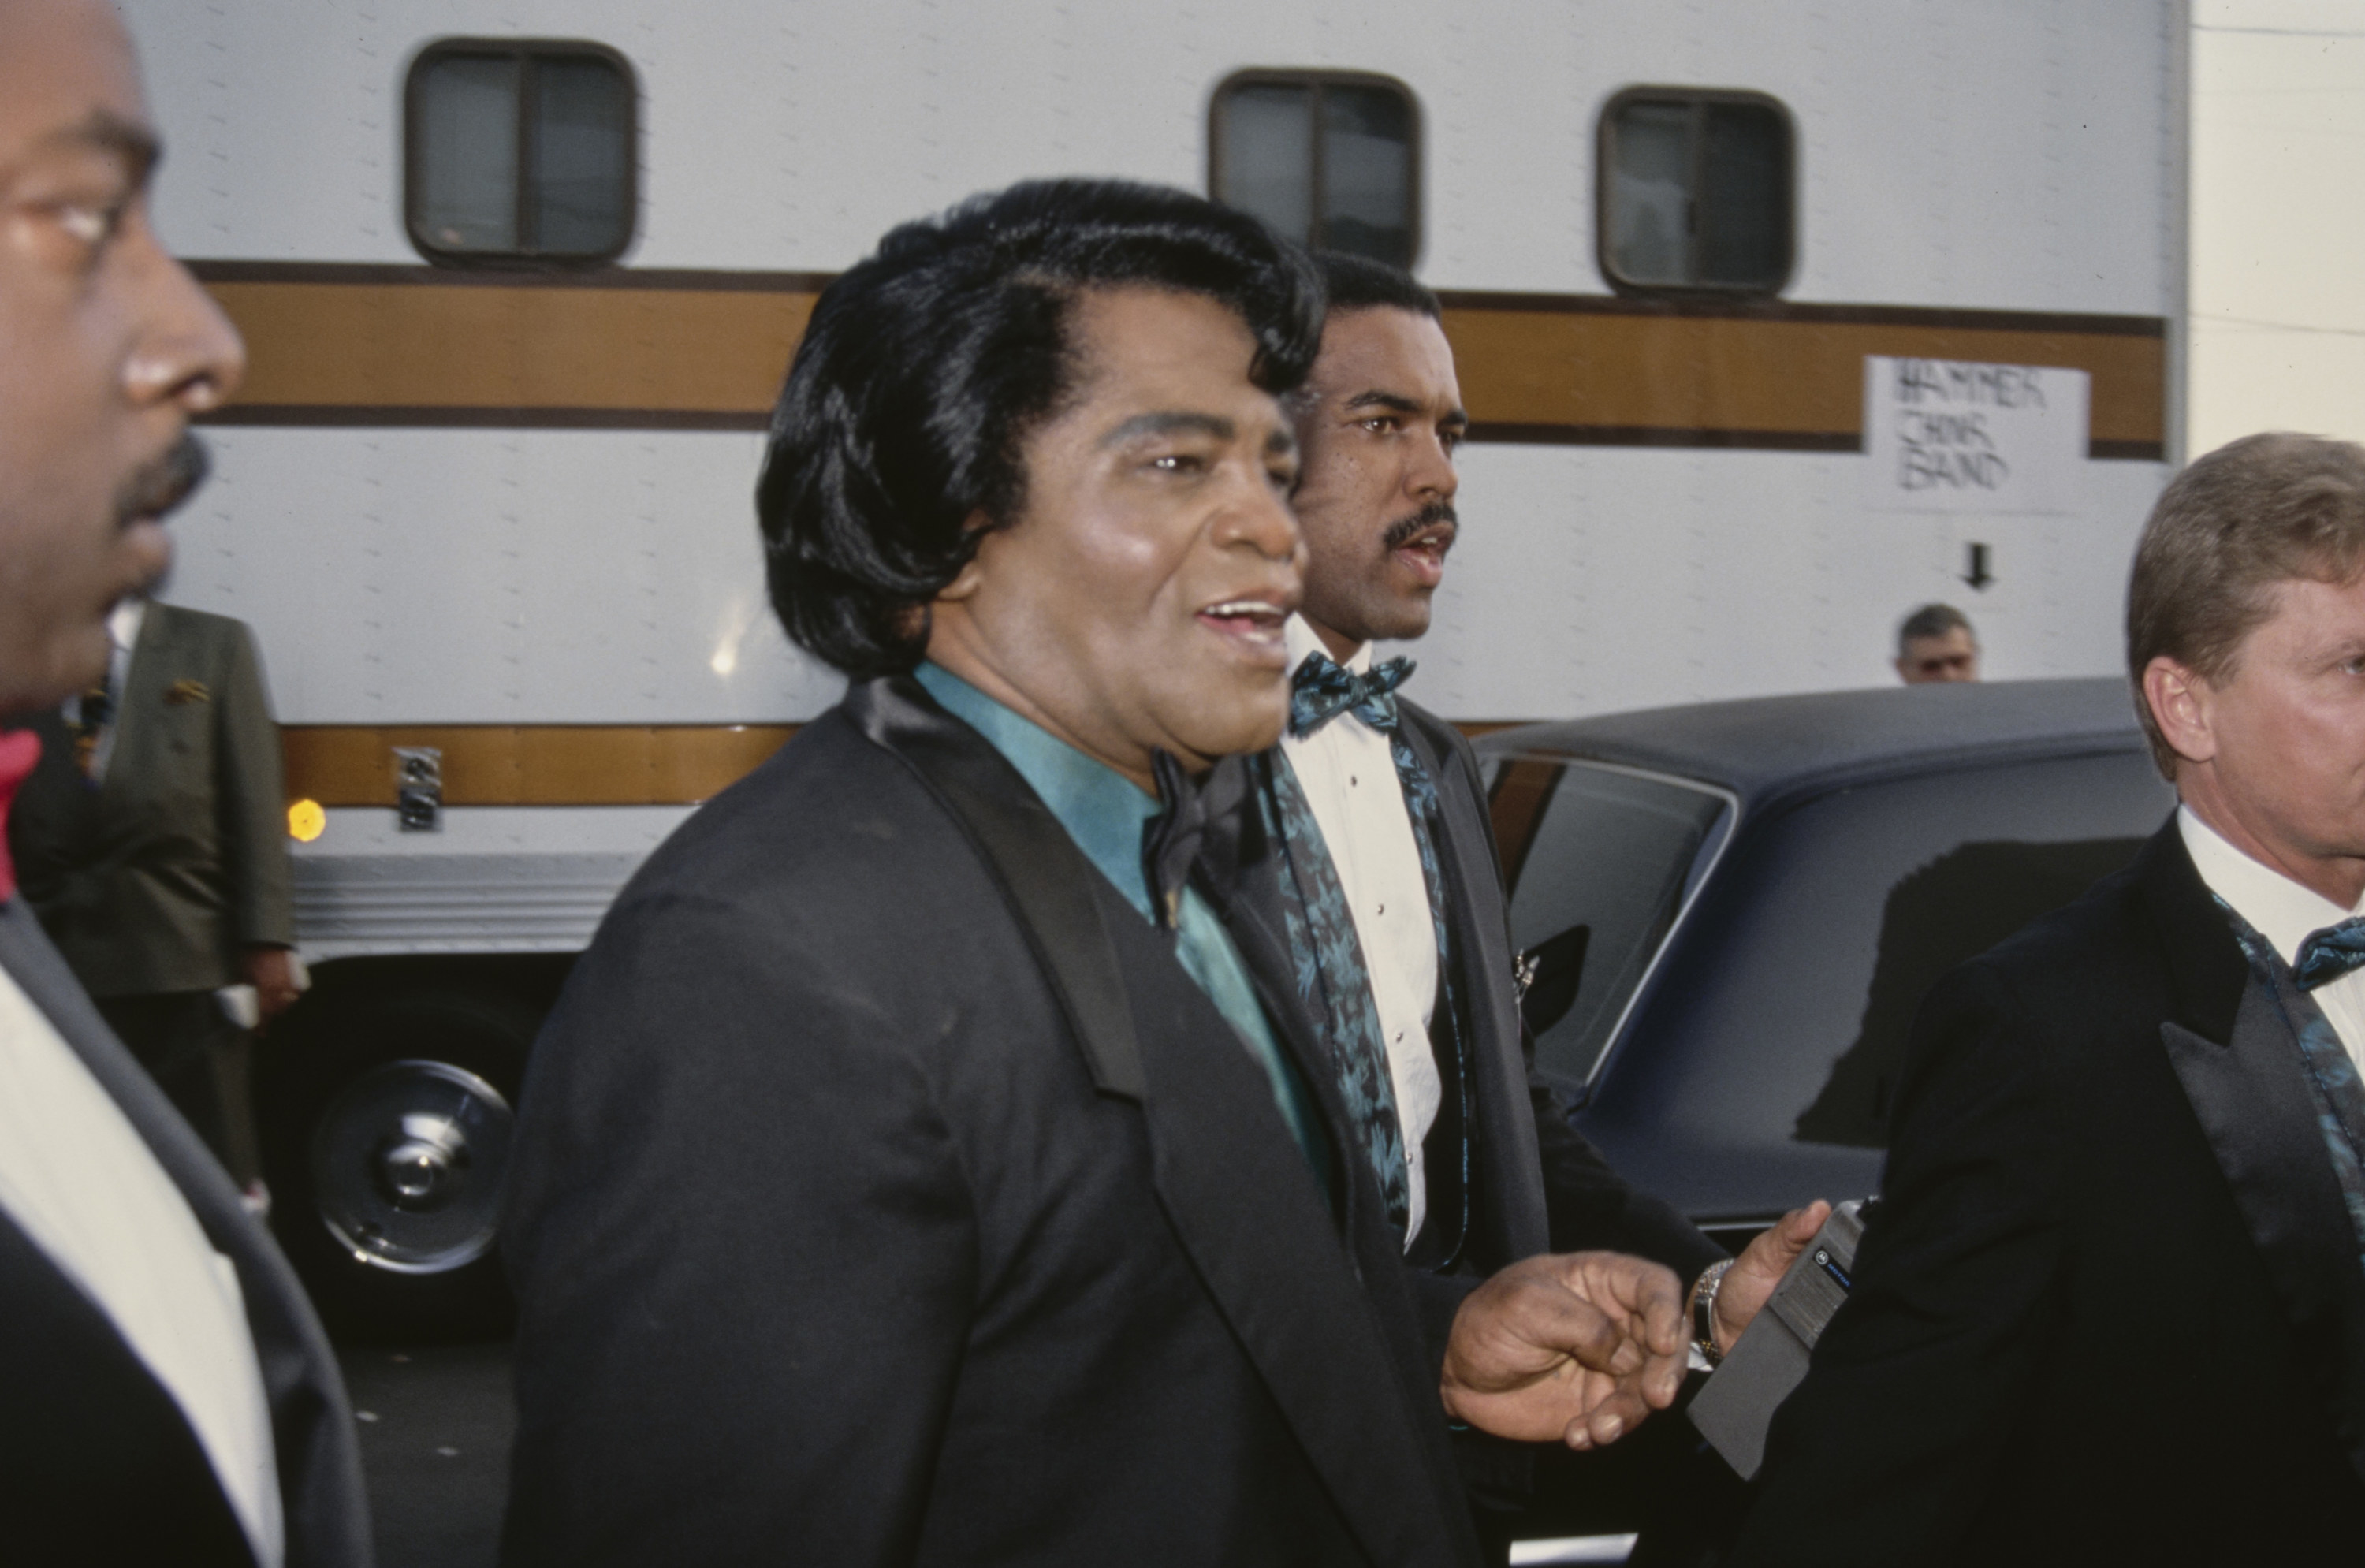 James Brown arriving at the 1992 American Music Awards in Los Angeles